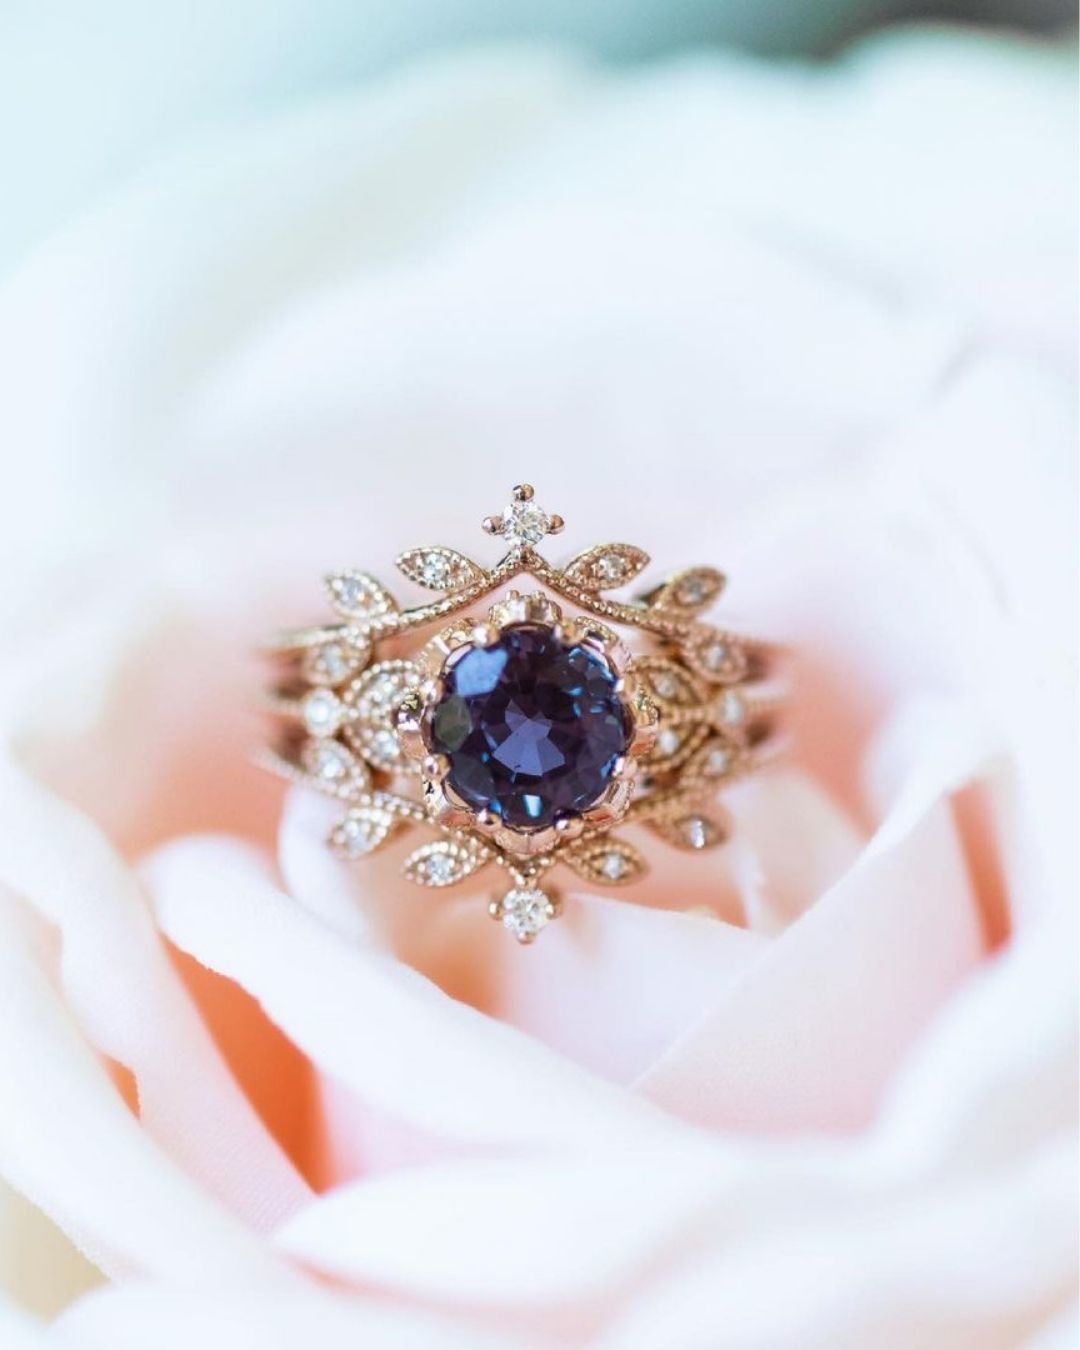 rose gold wedding rings with fantastic sapphires